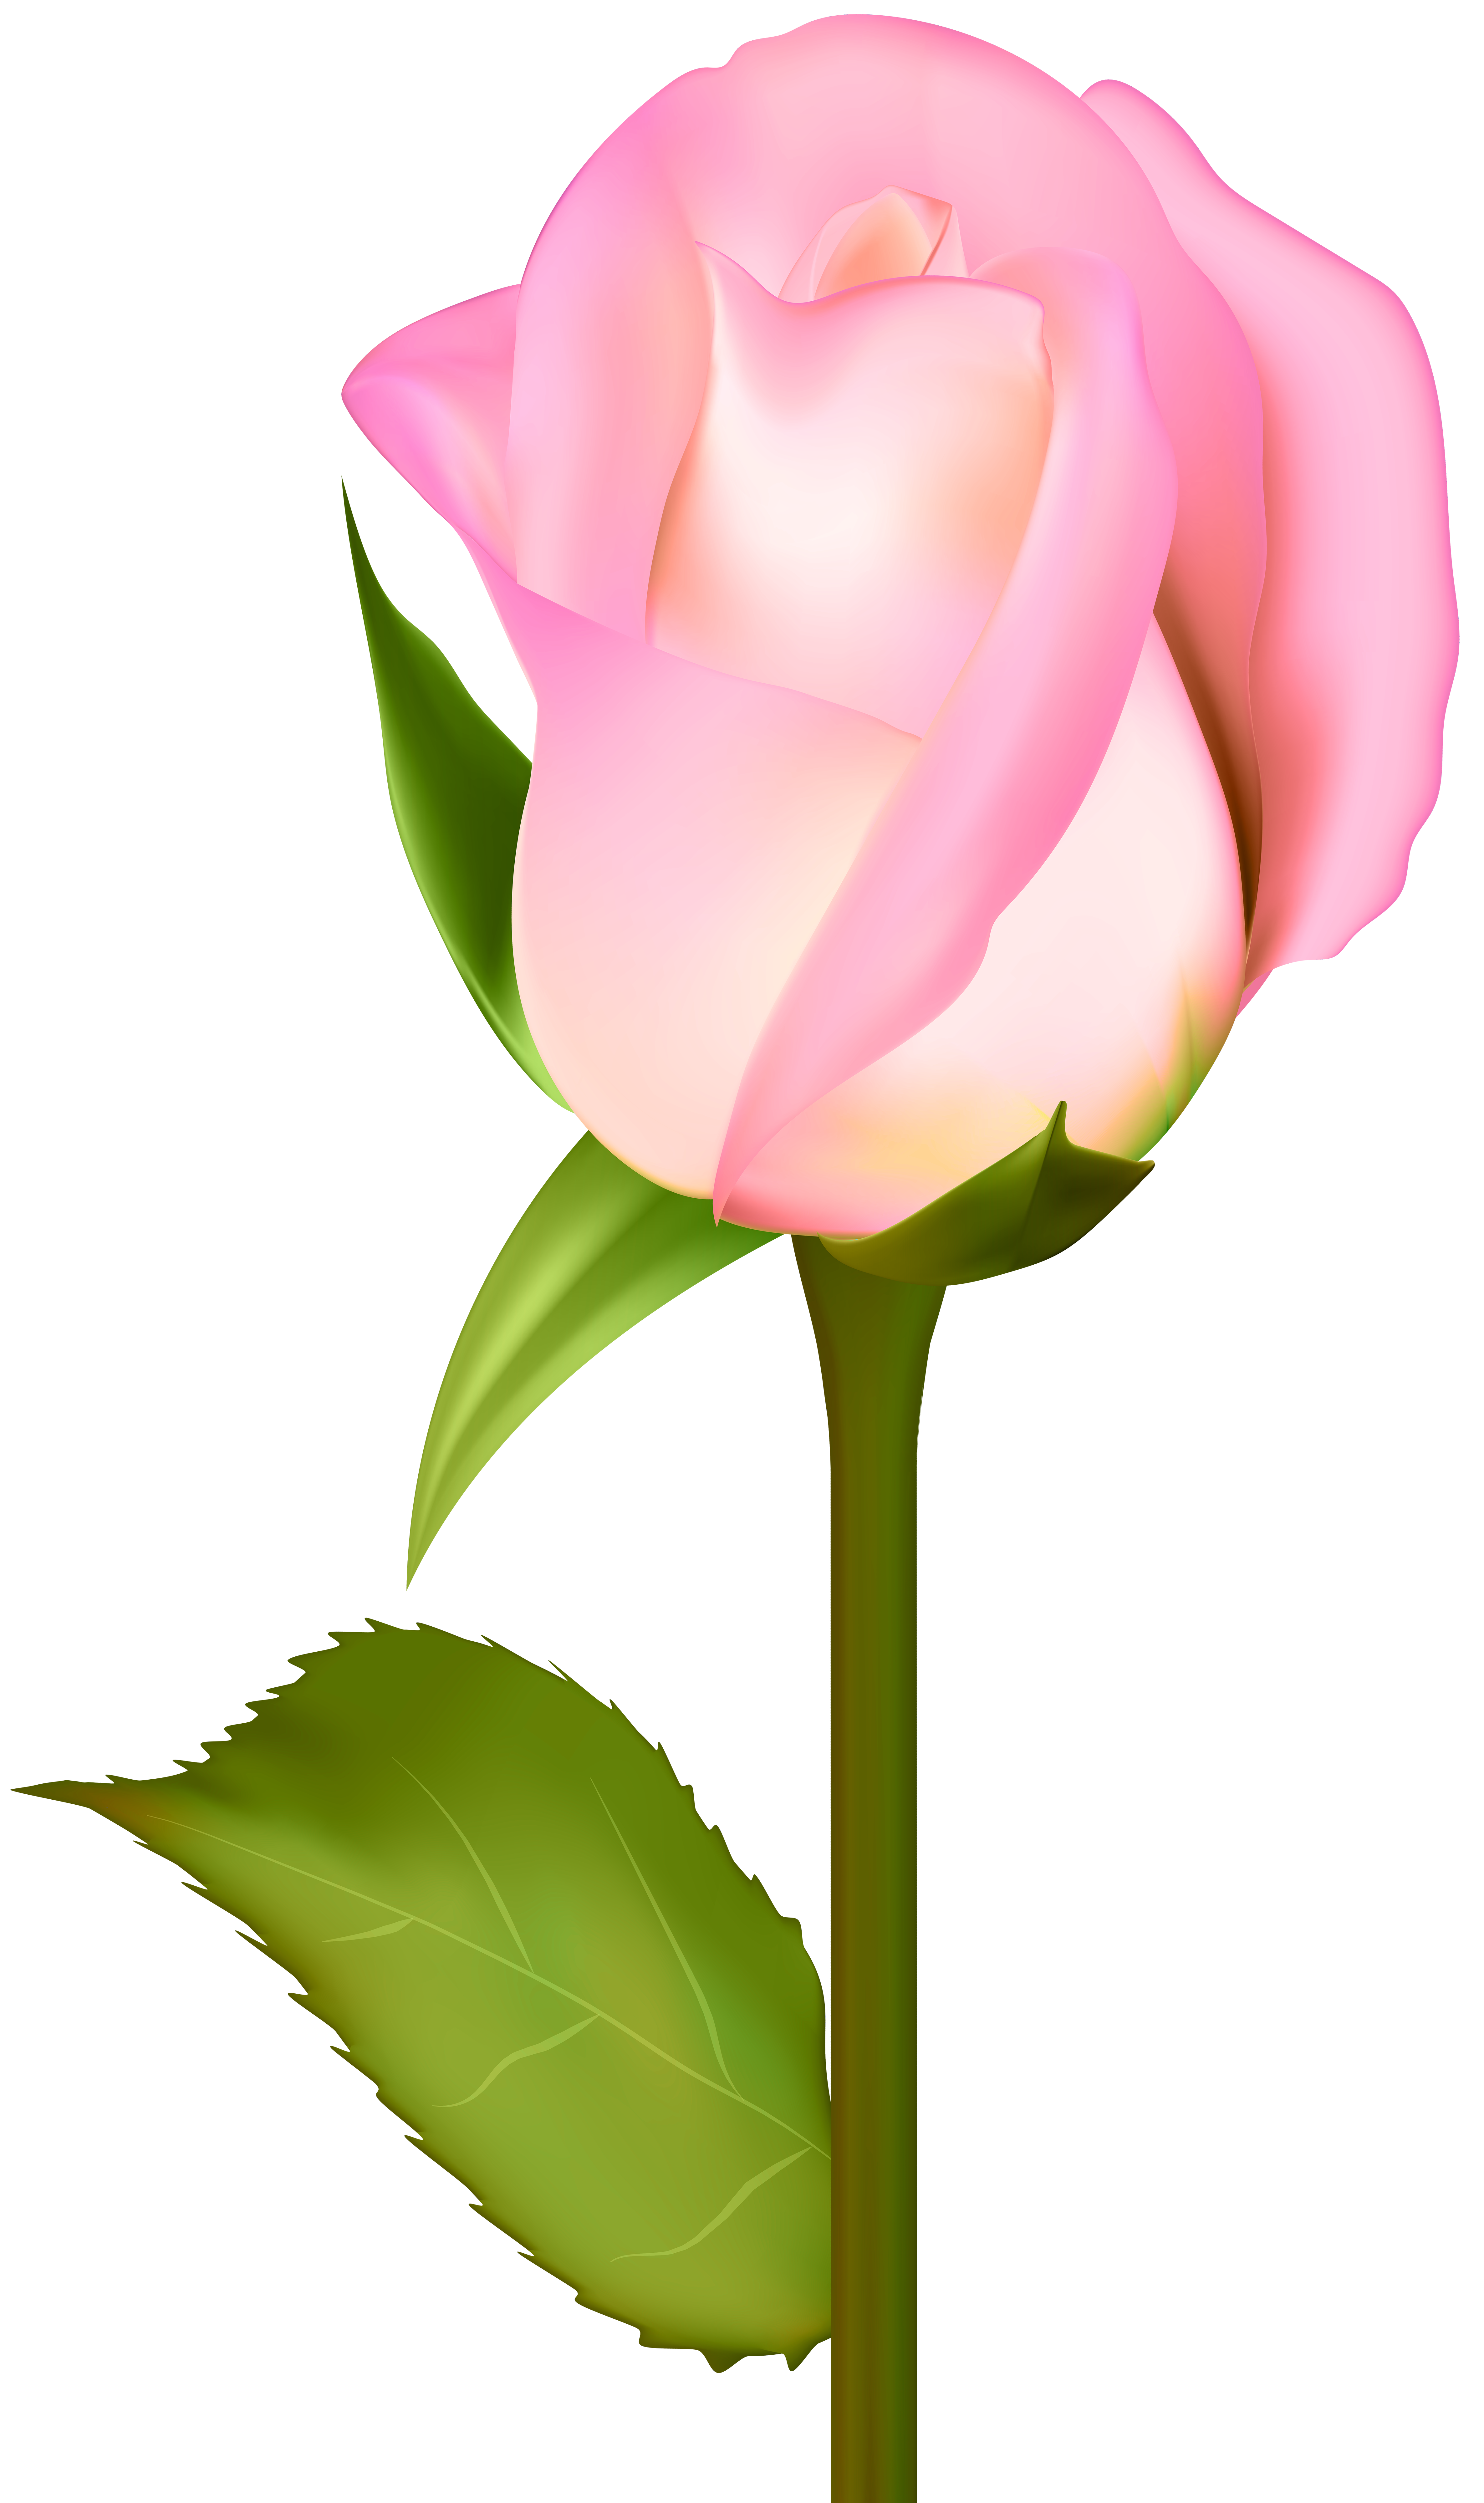 Rose at getdrawings com. Flowers clipart garden